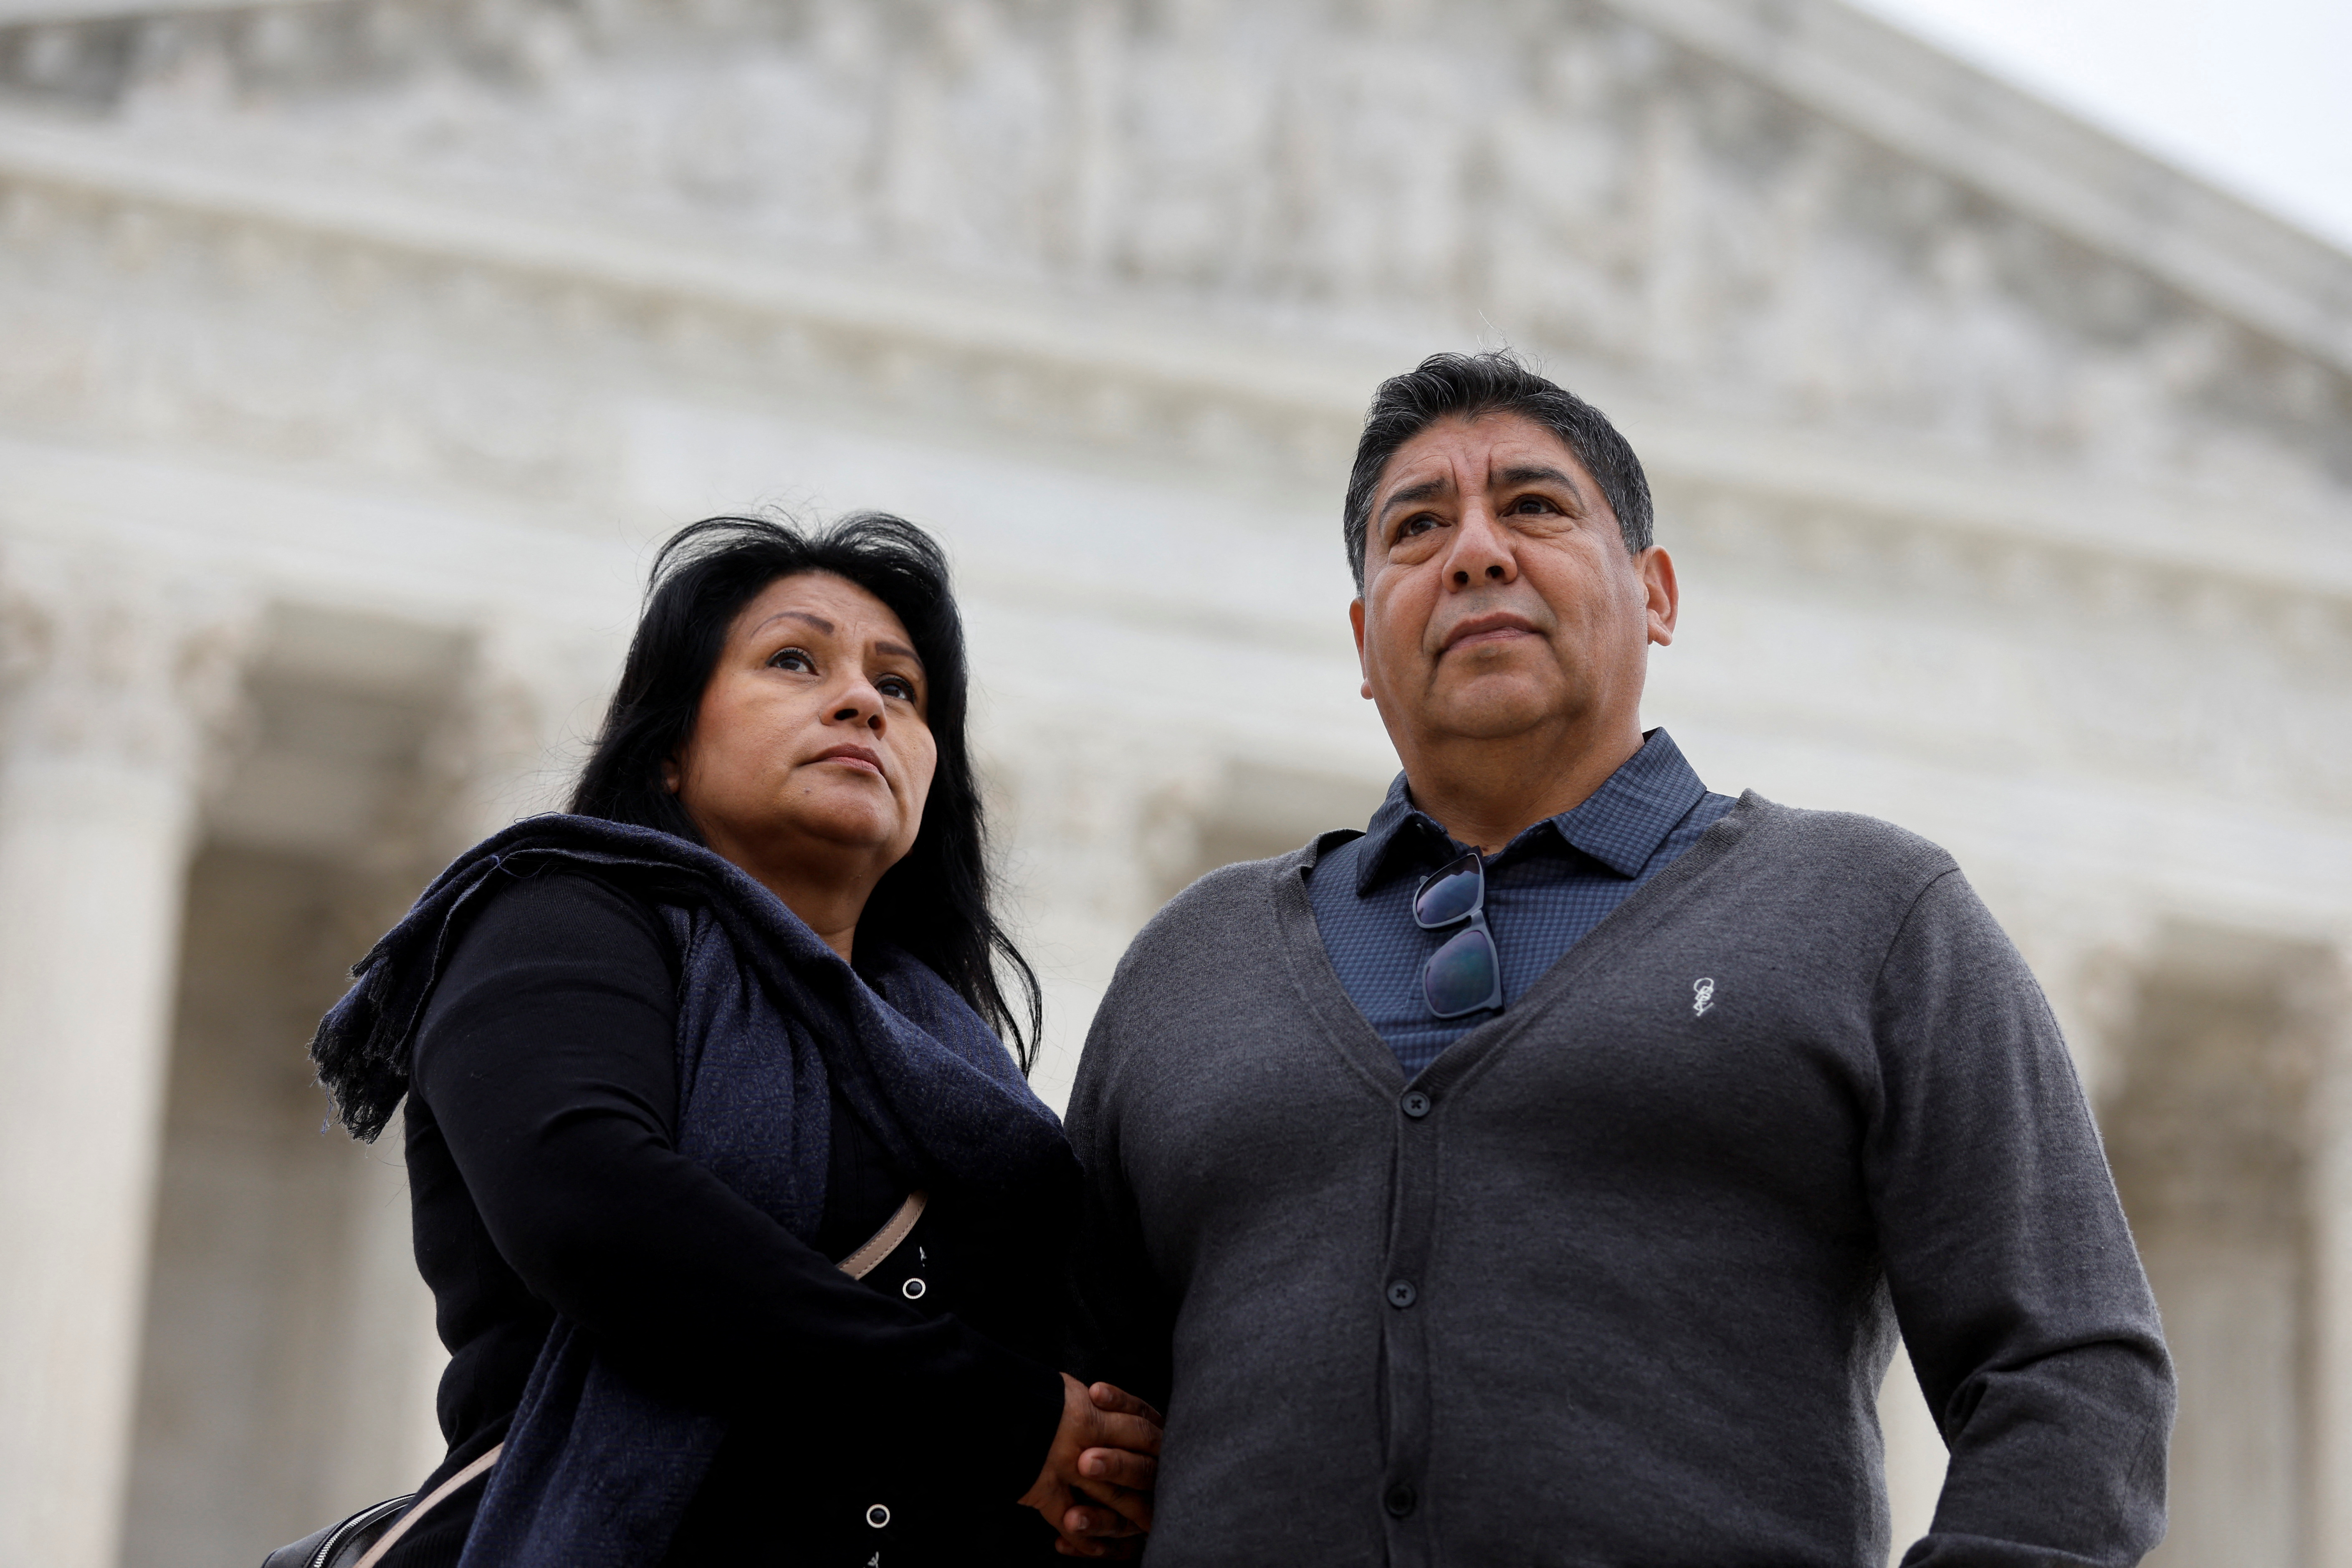 Beatrice Gonzalez and Jose Hernandez, whose child was fatally shot and killed in a 2015 rampage in Paris, are seen outside the U.S. Supreme Court in Washington